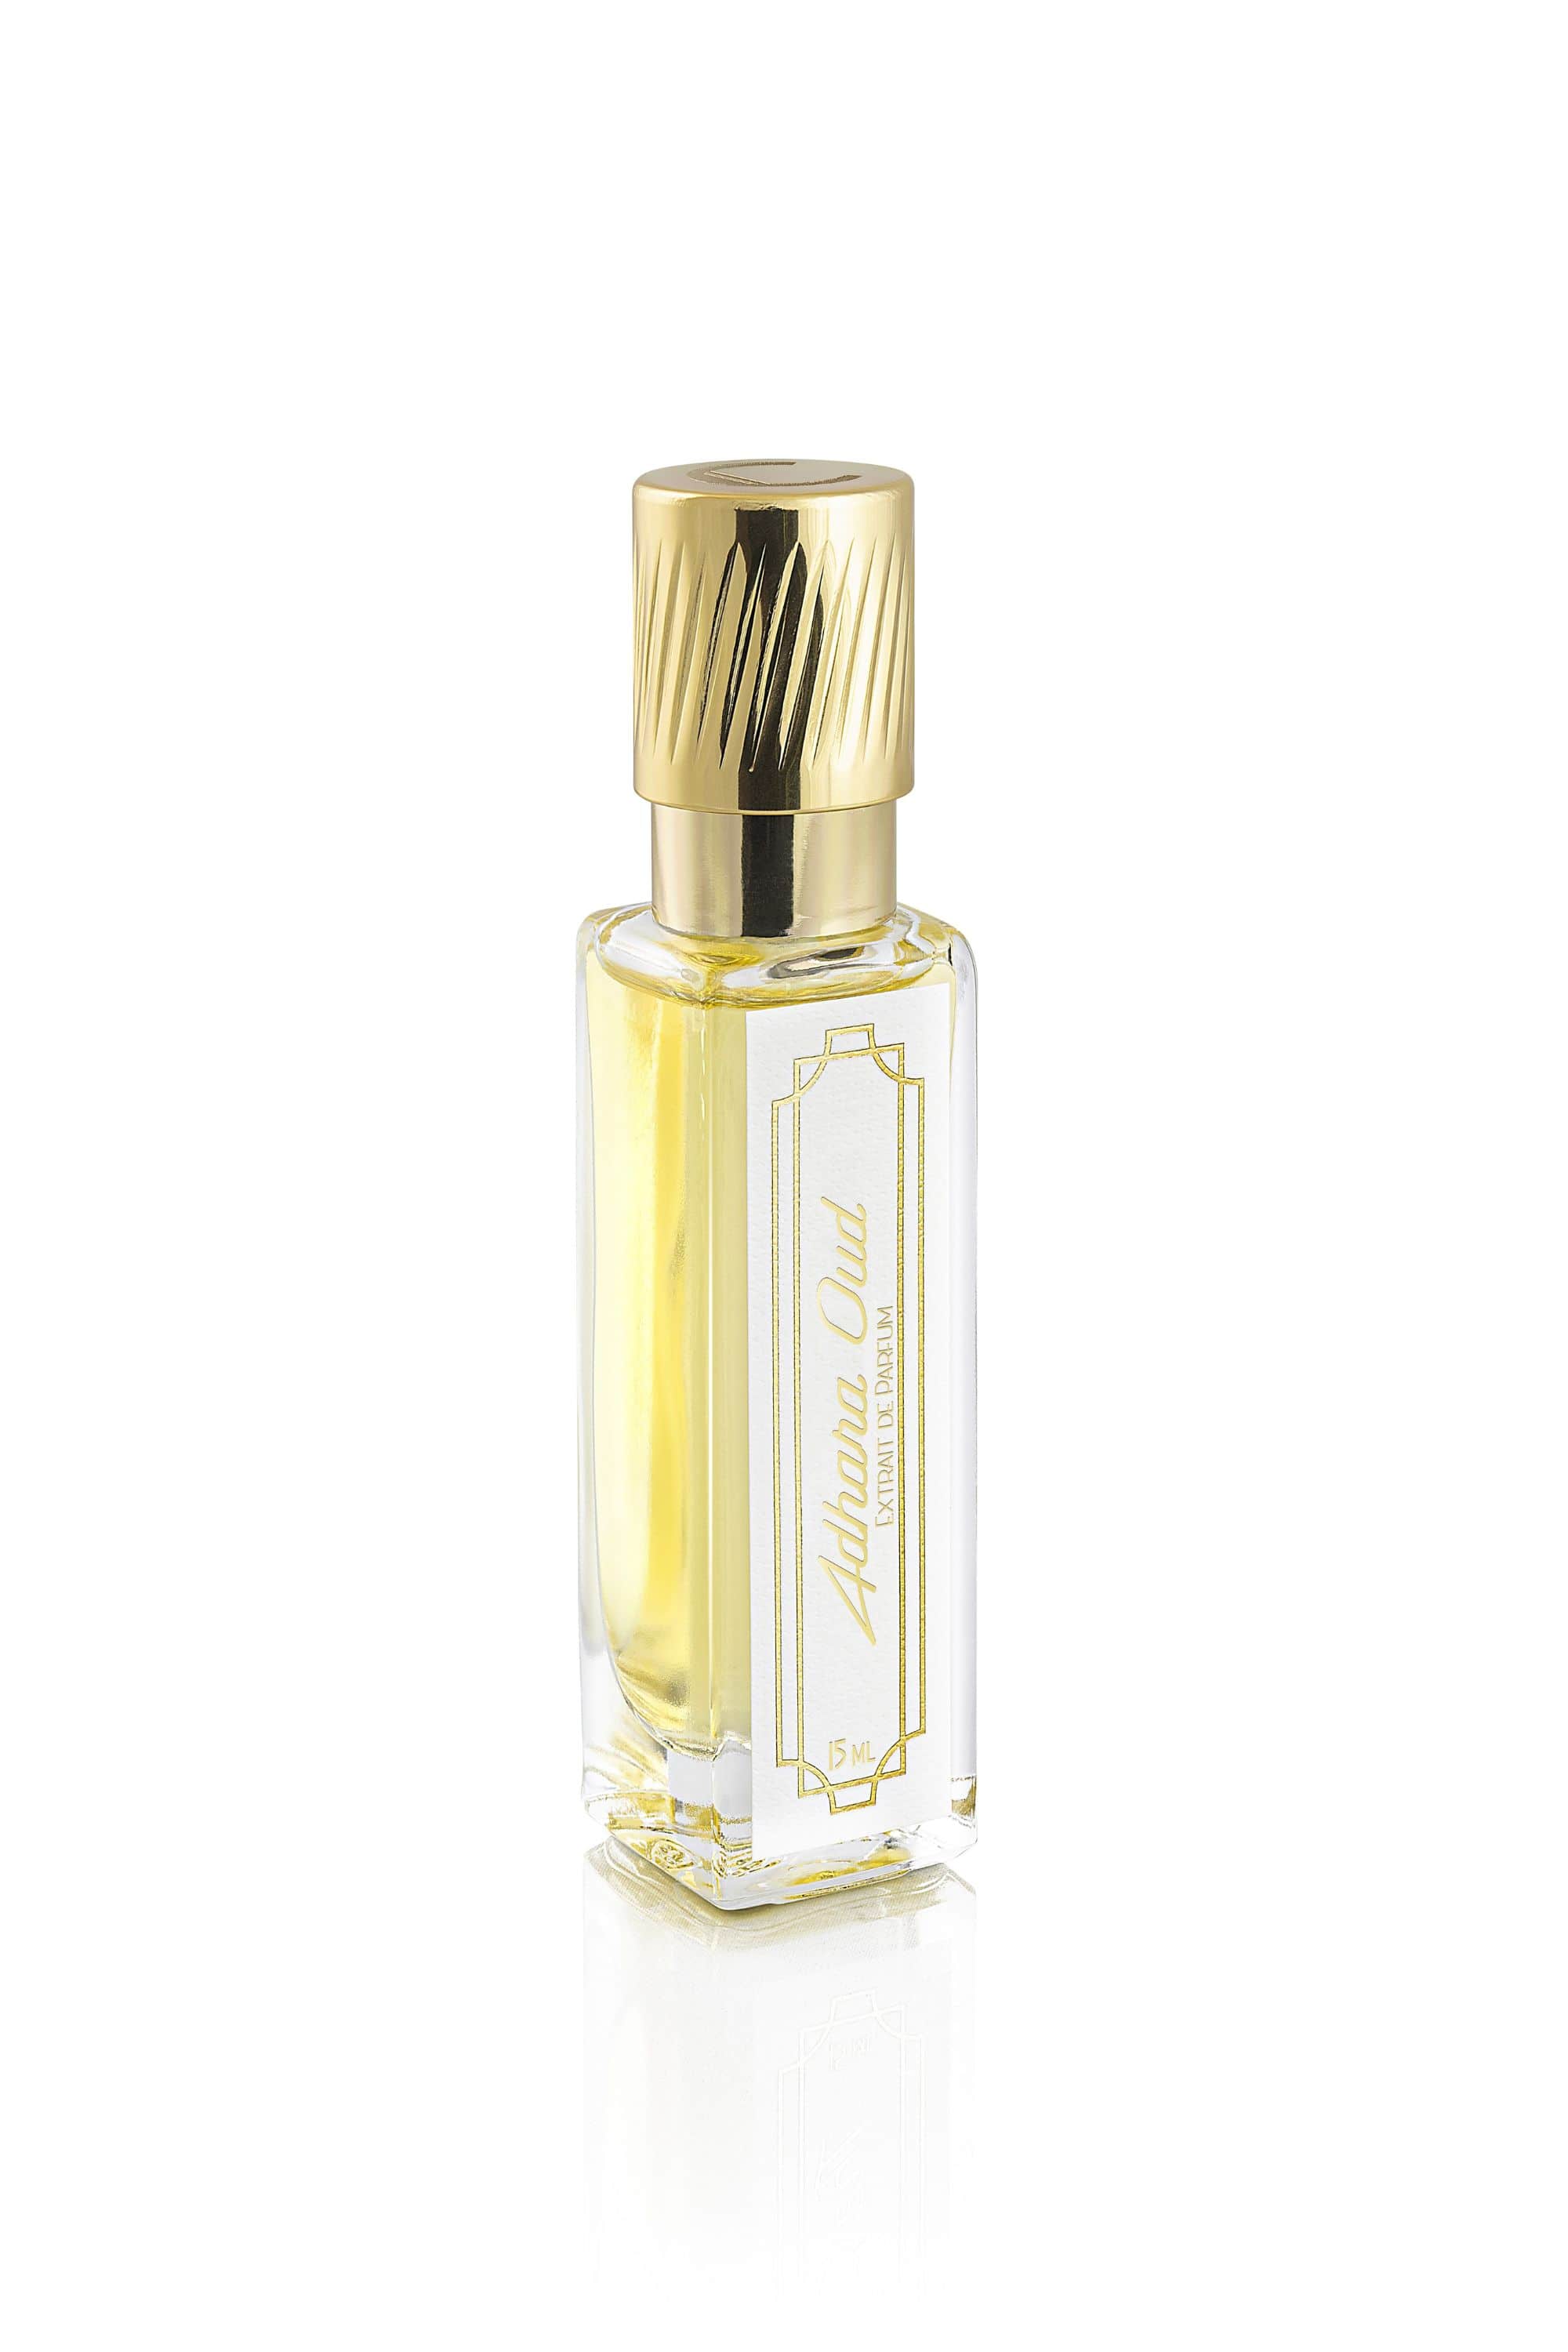 Adhara Oud 15ml front view